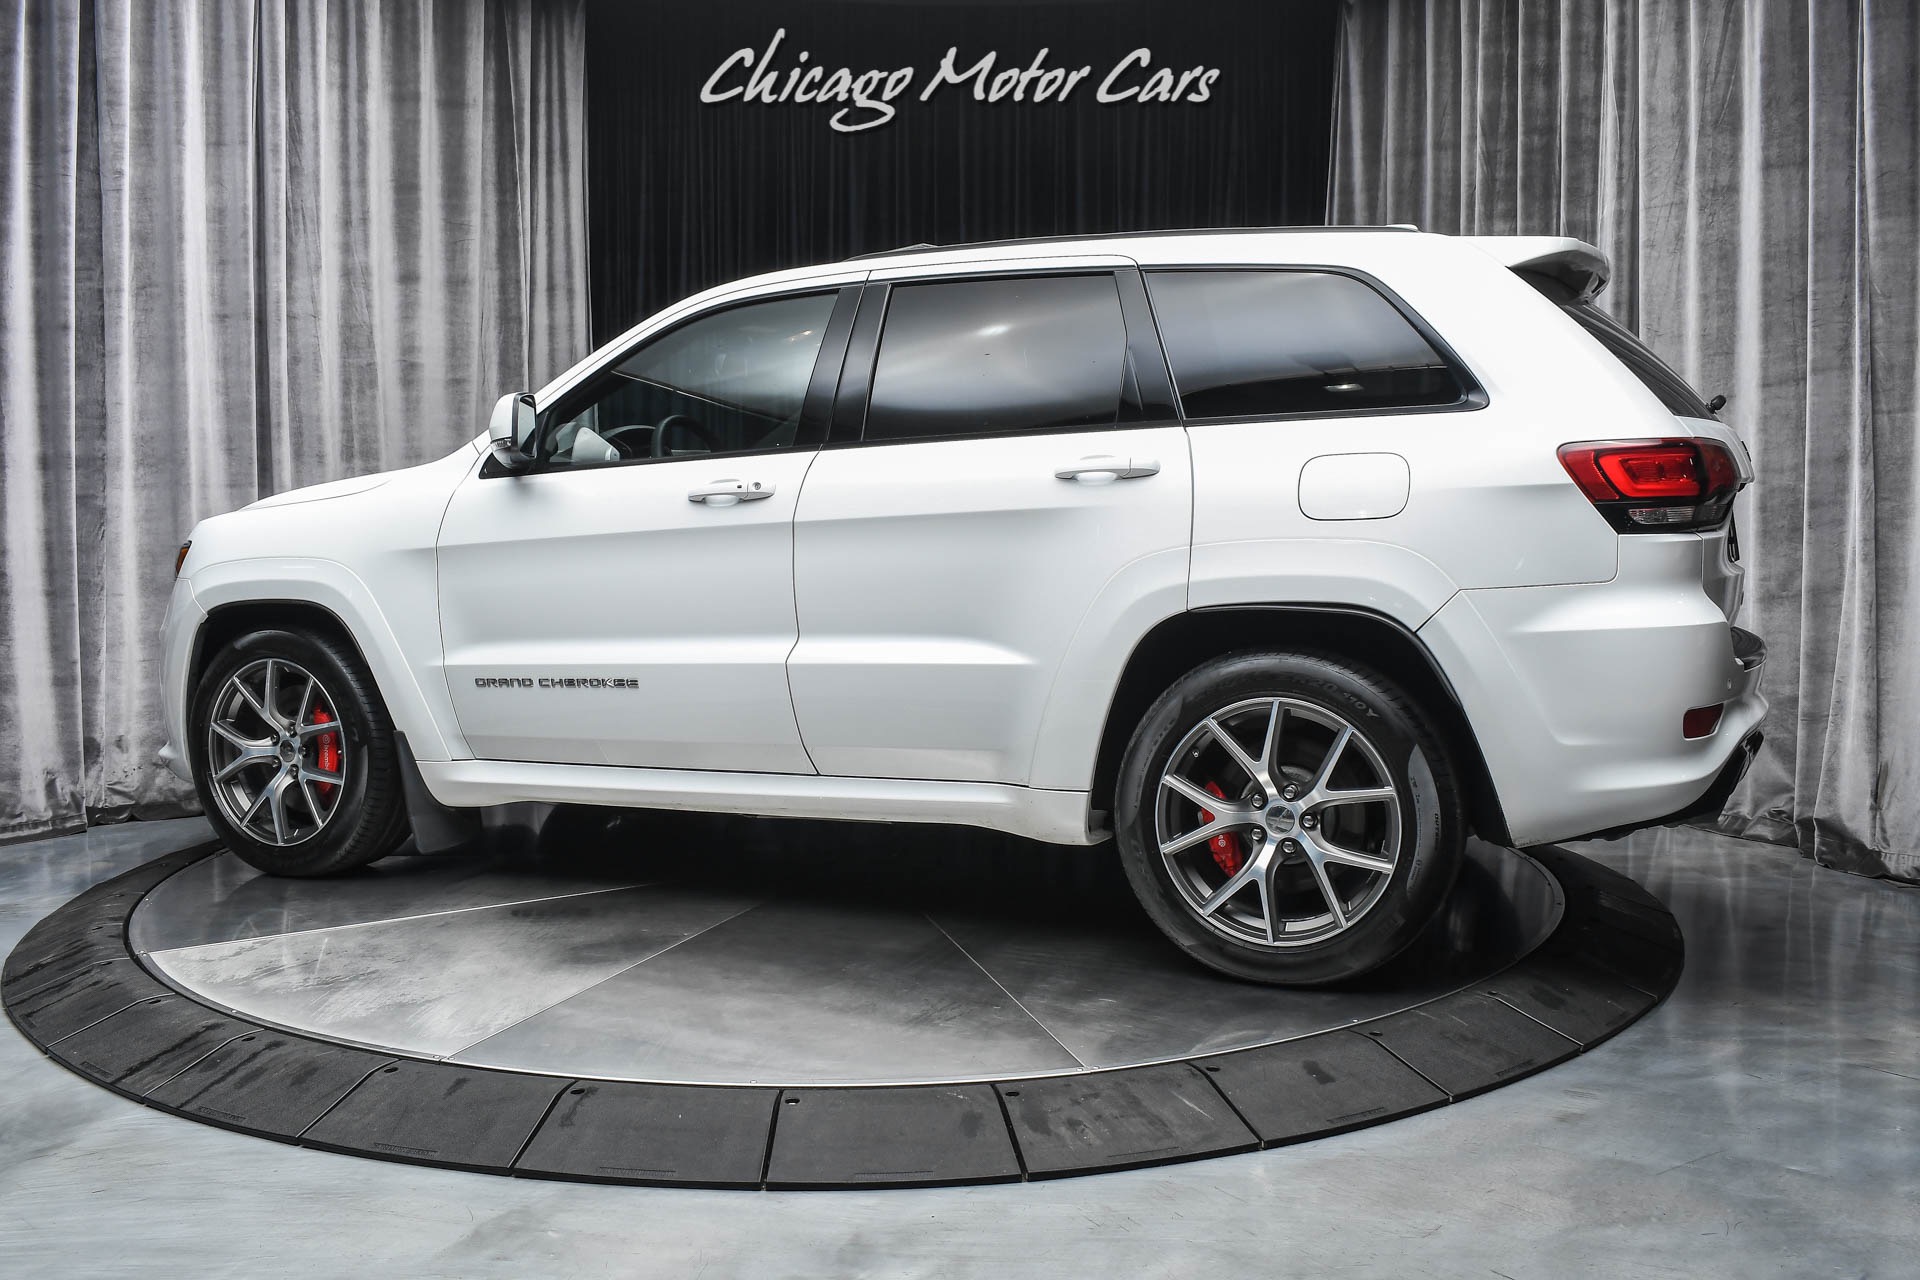 Used-2016-Jeep-Grand-Cherokee-SRT-SUV-Only-30k-Miles-LOADED-LAGUNA-LEATHER-Rear-Entertainment